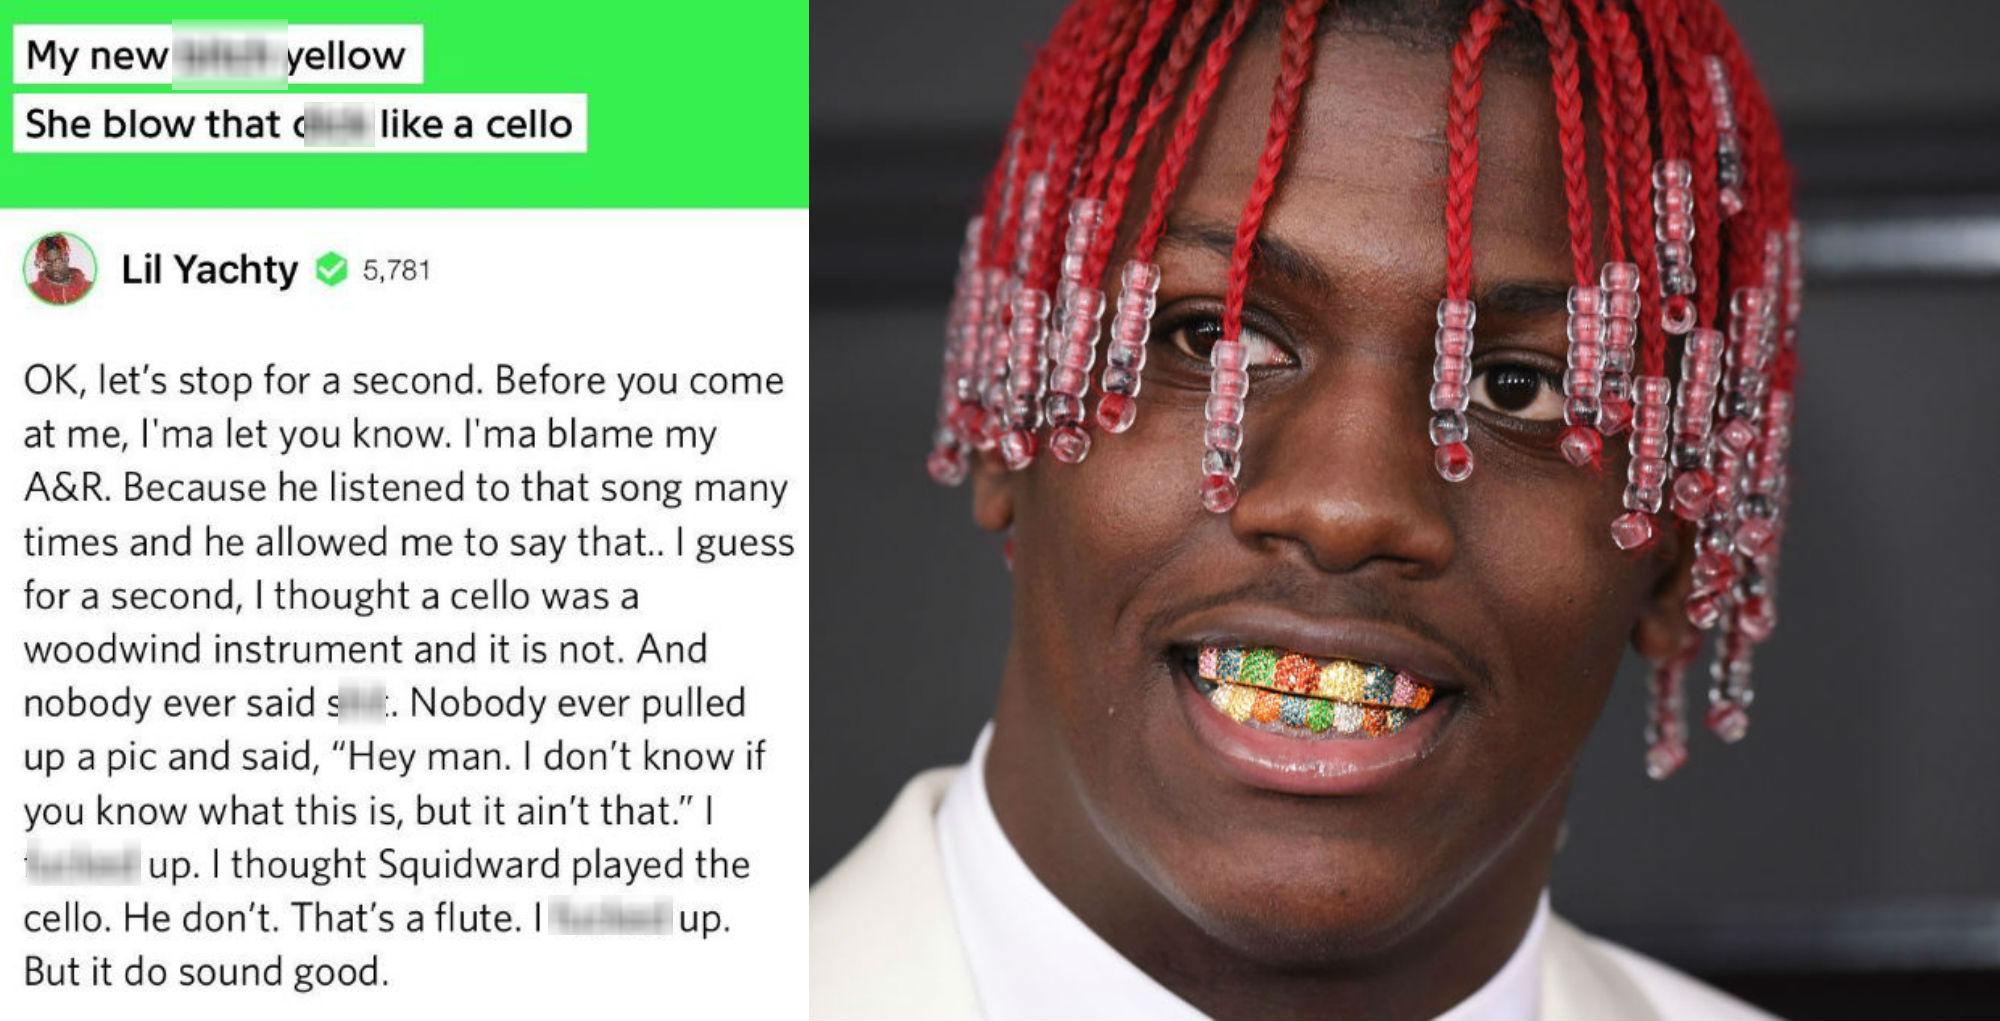 Lil yachty suck my dick like a cello